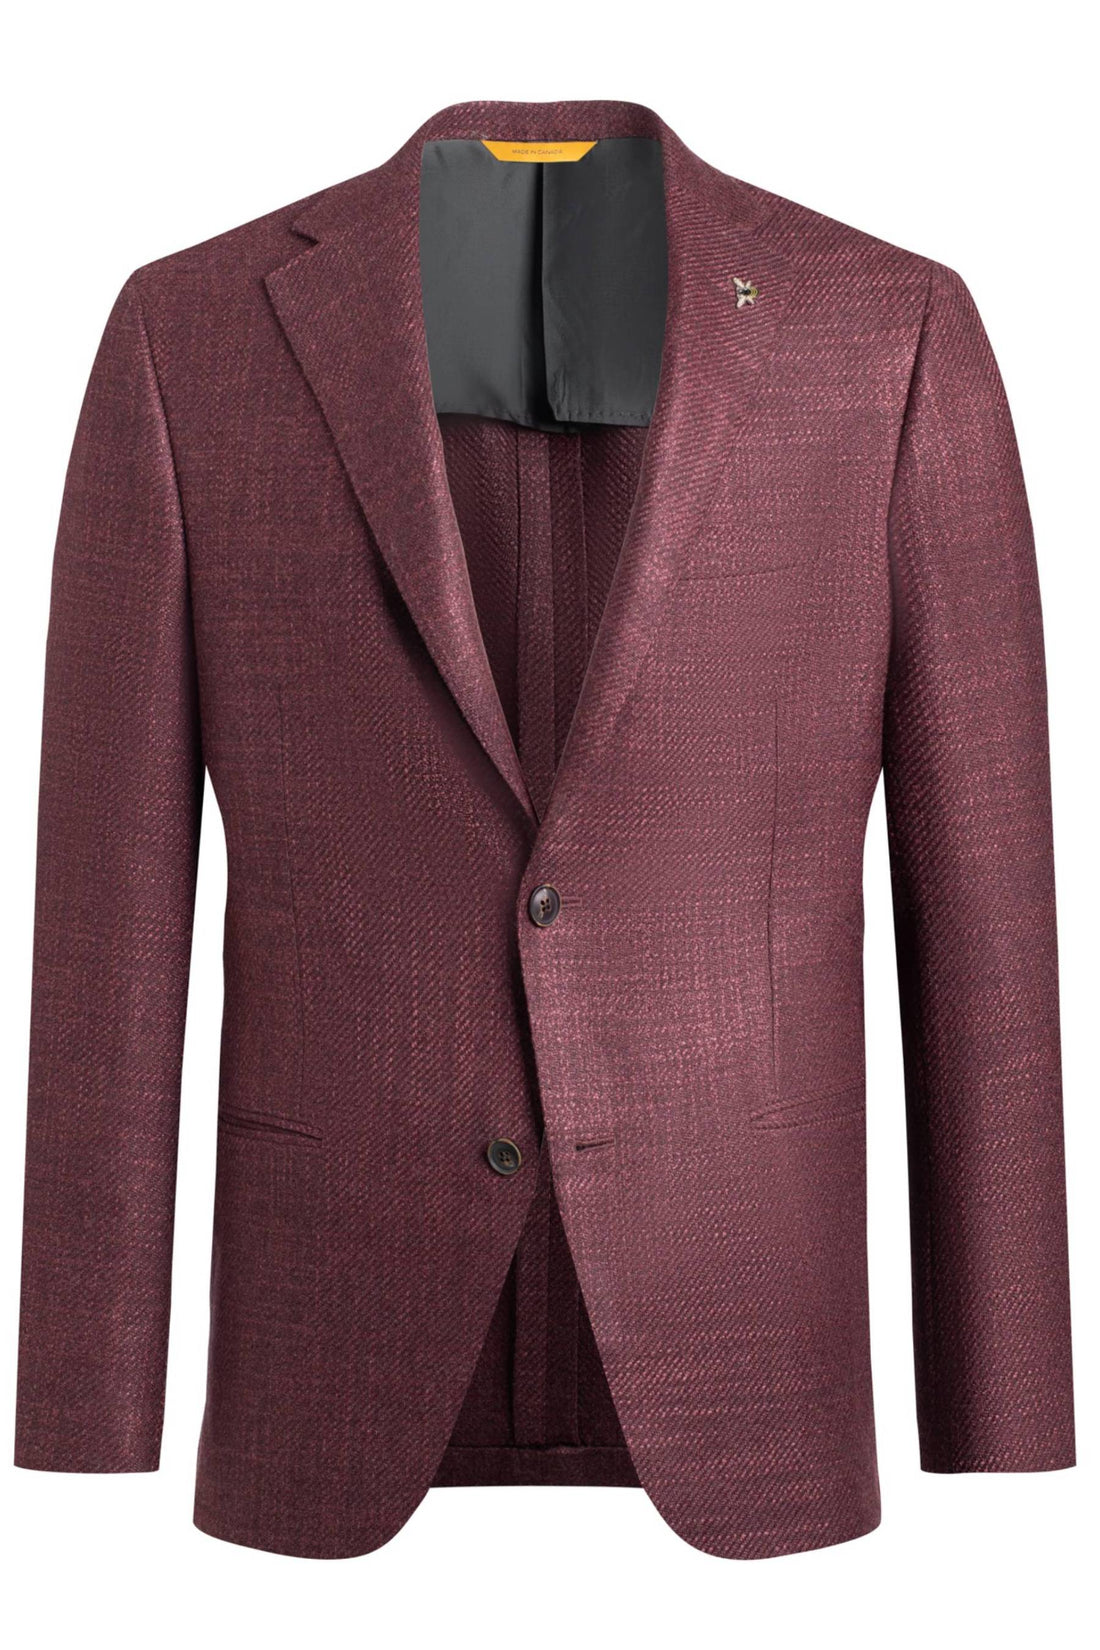 Heritage Gold Bordeaux Twill Luxe Honey Way Jacket front ghost